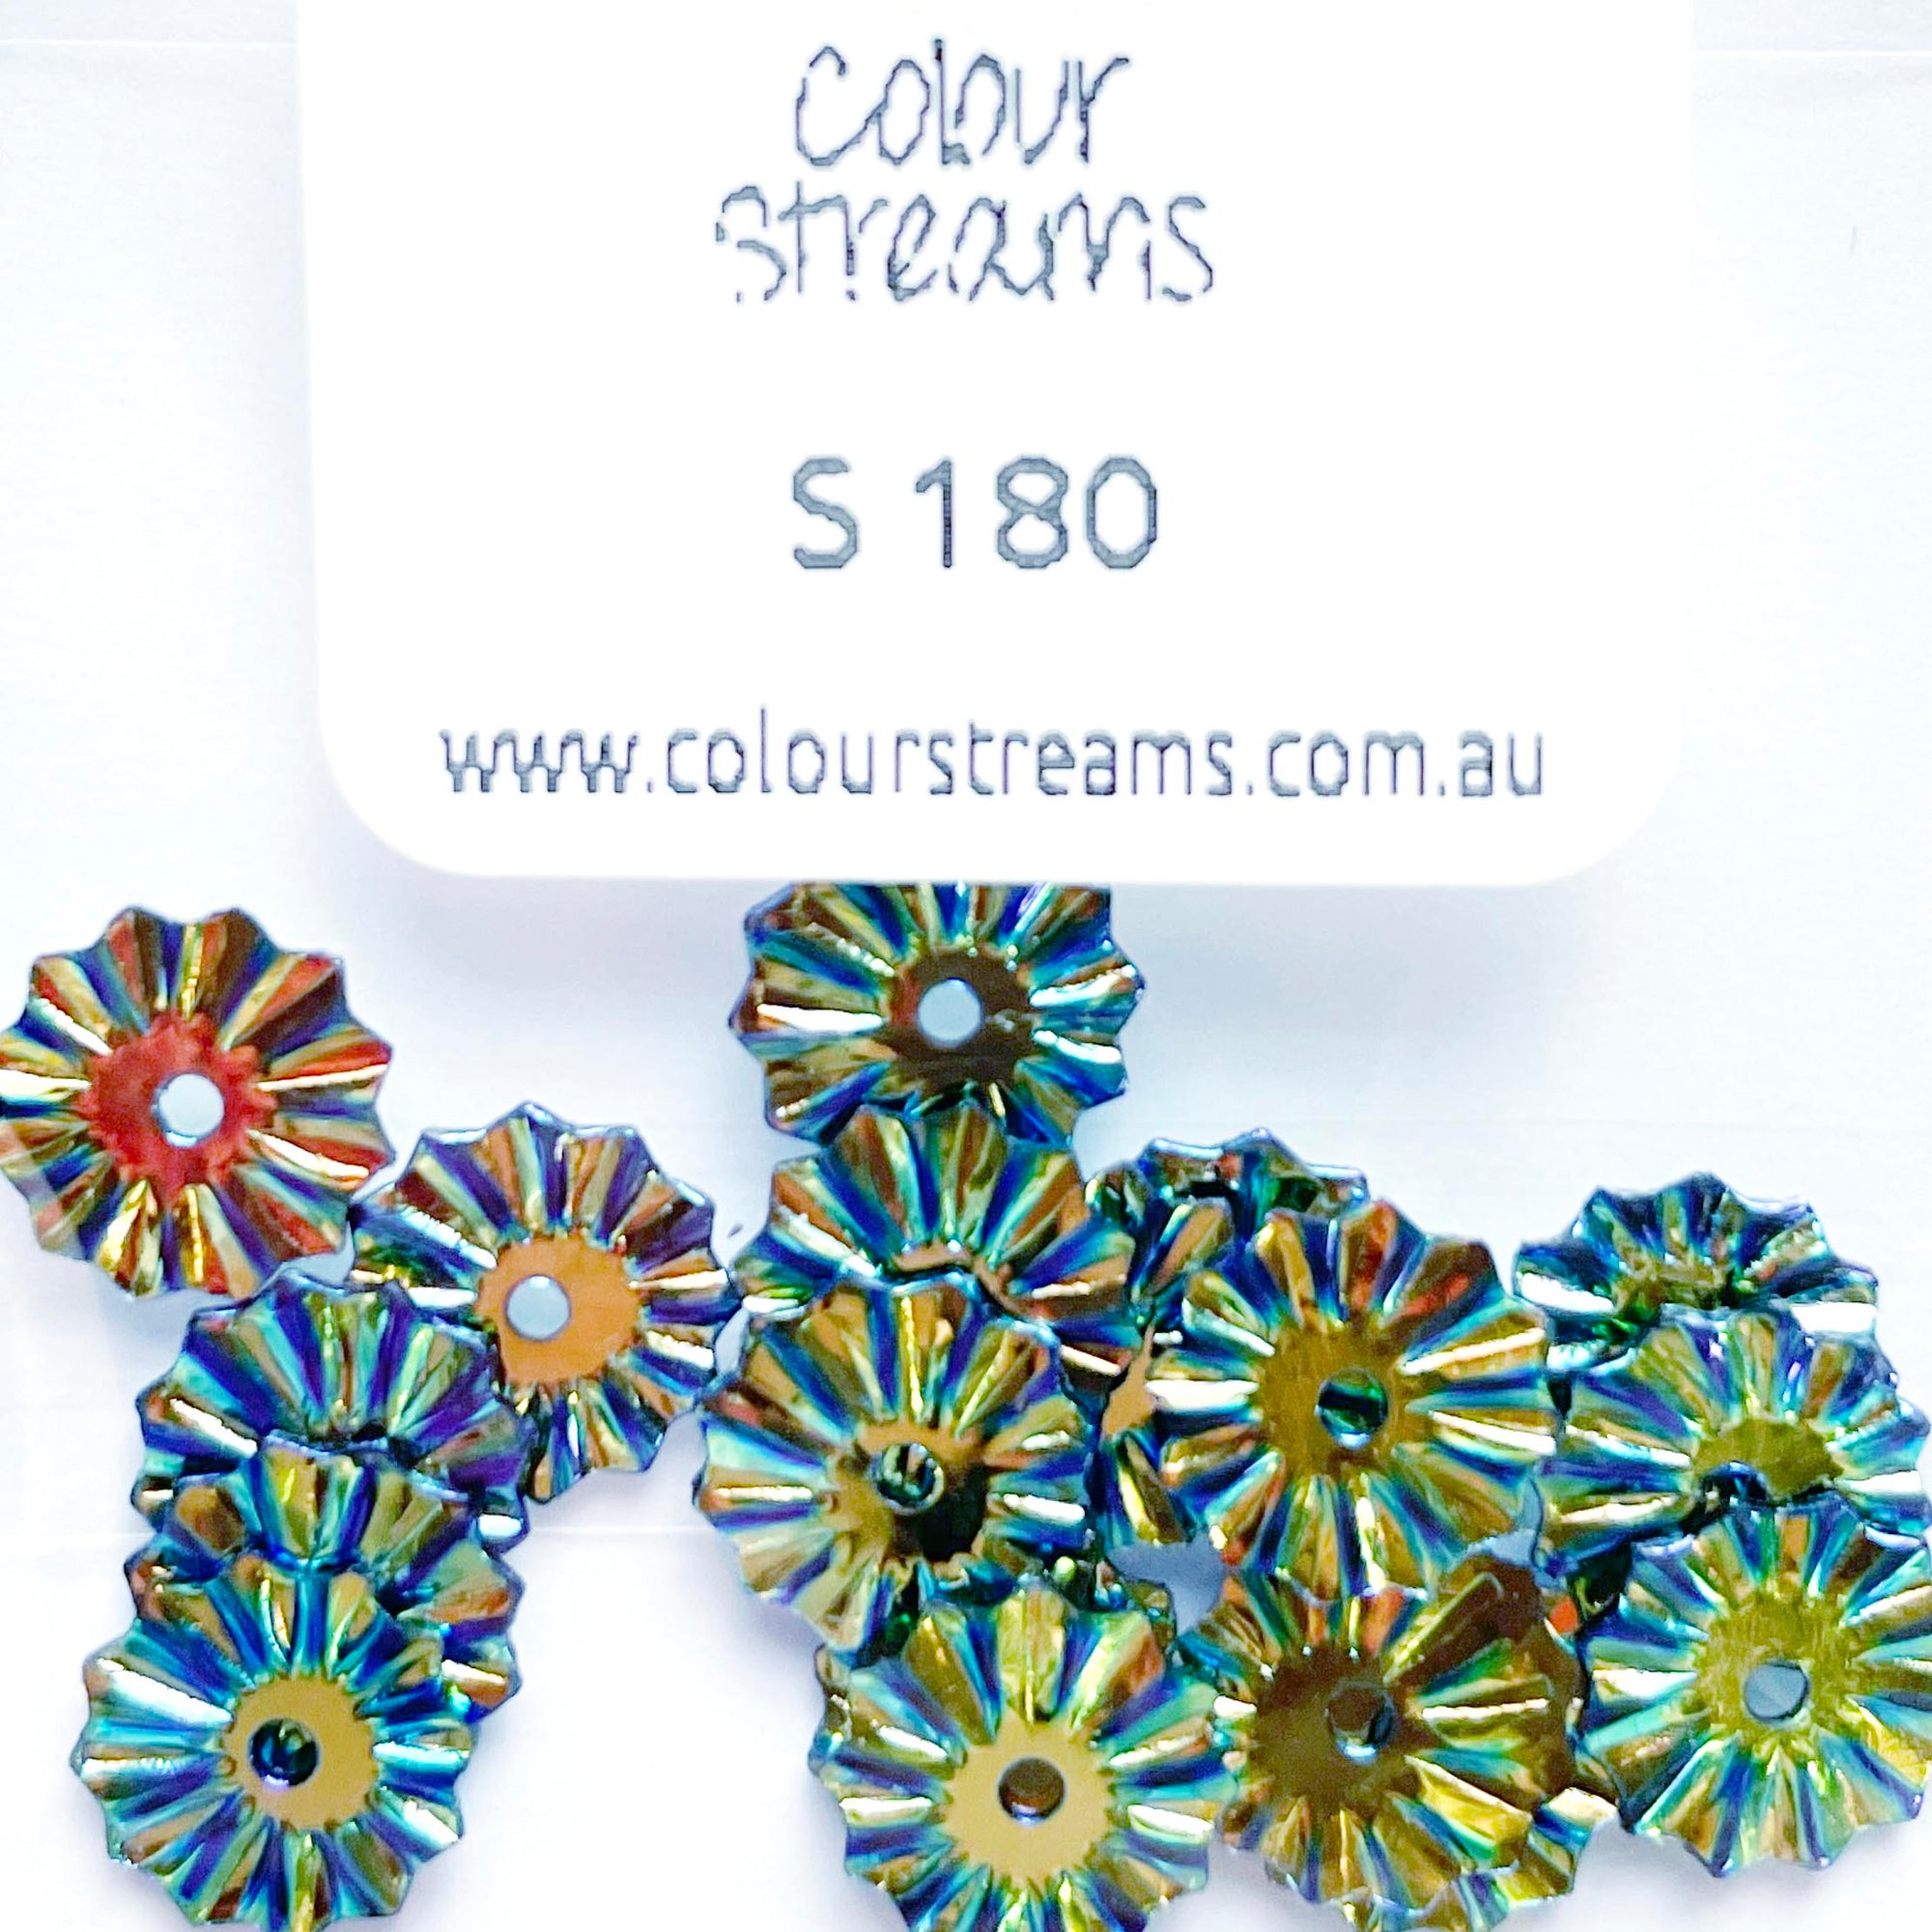 www.colourstreams.com.au  Colour Streams Sequins Embellishments Stitching Costumes Mardi Gras Dancing Ballet Theatre Shows Drag Queen Bling S180 Roundwheel Gold with Green and Blue Lights Iridescent Reflective 8mm